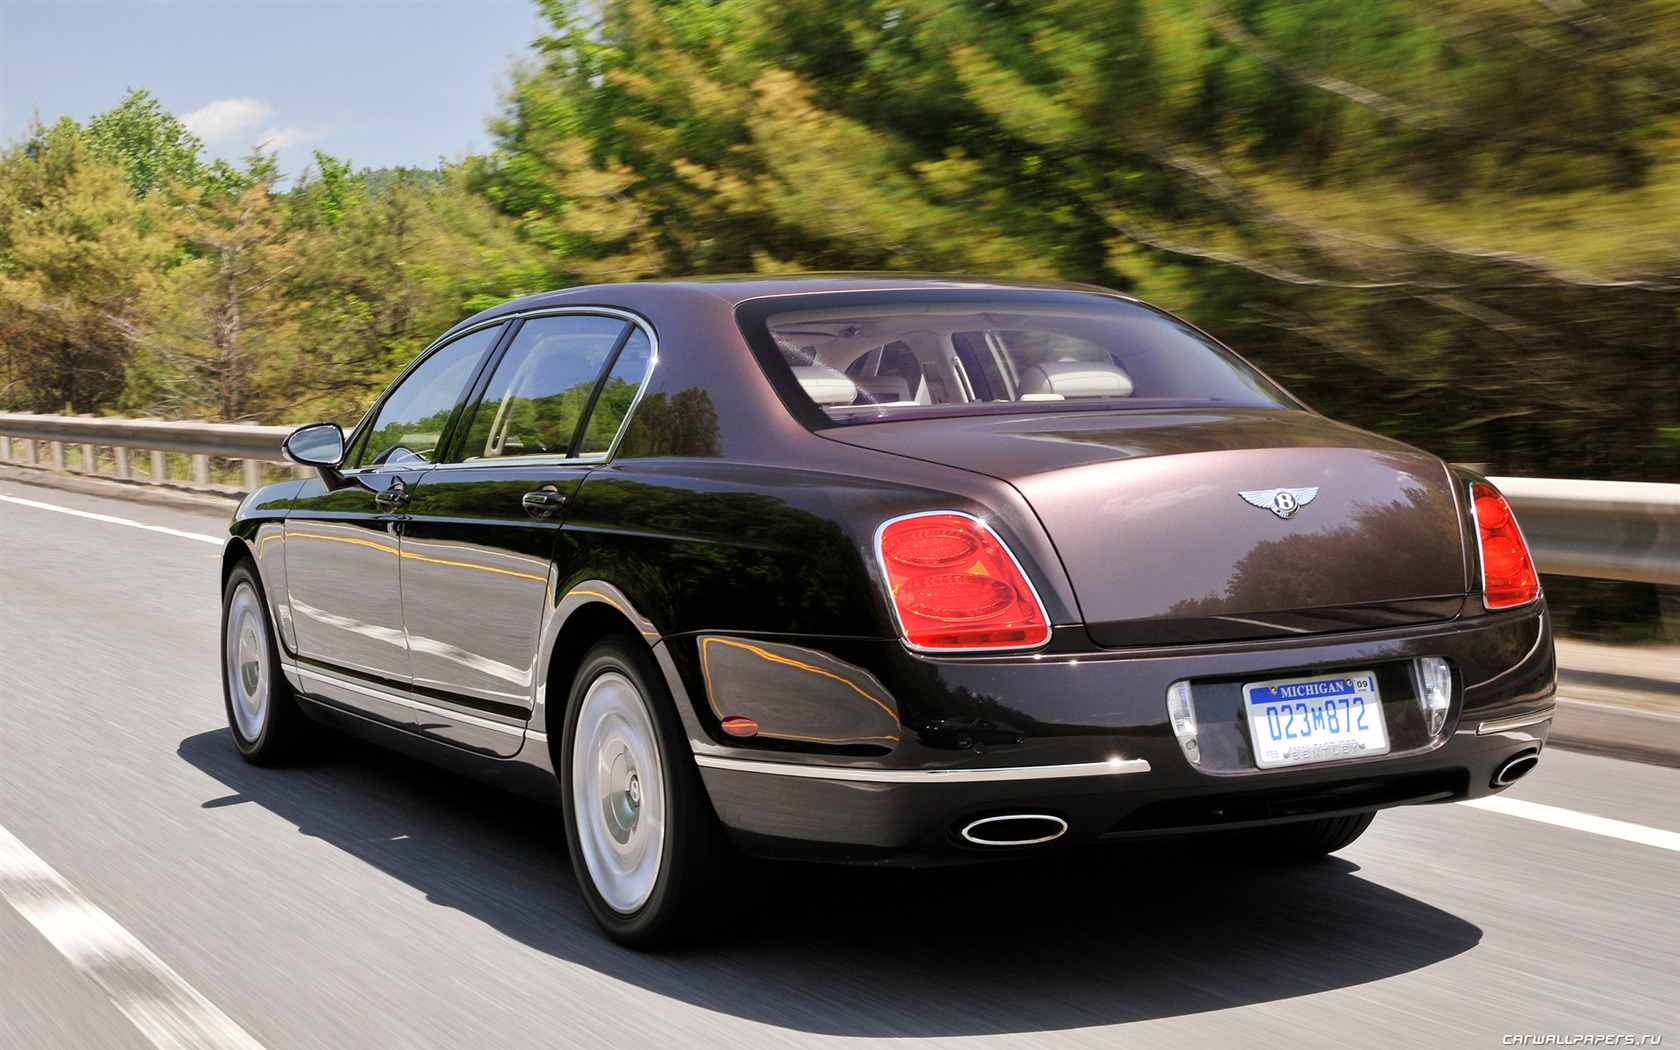 Bentley Continental Flying Spur - 2008 宾利17 - 1680x1050